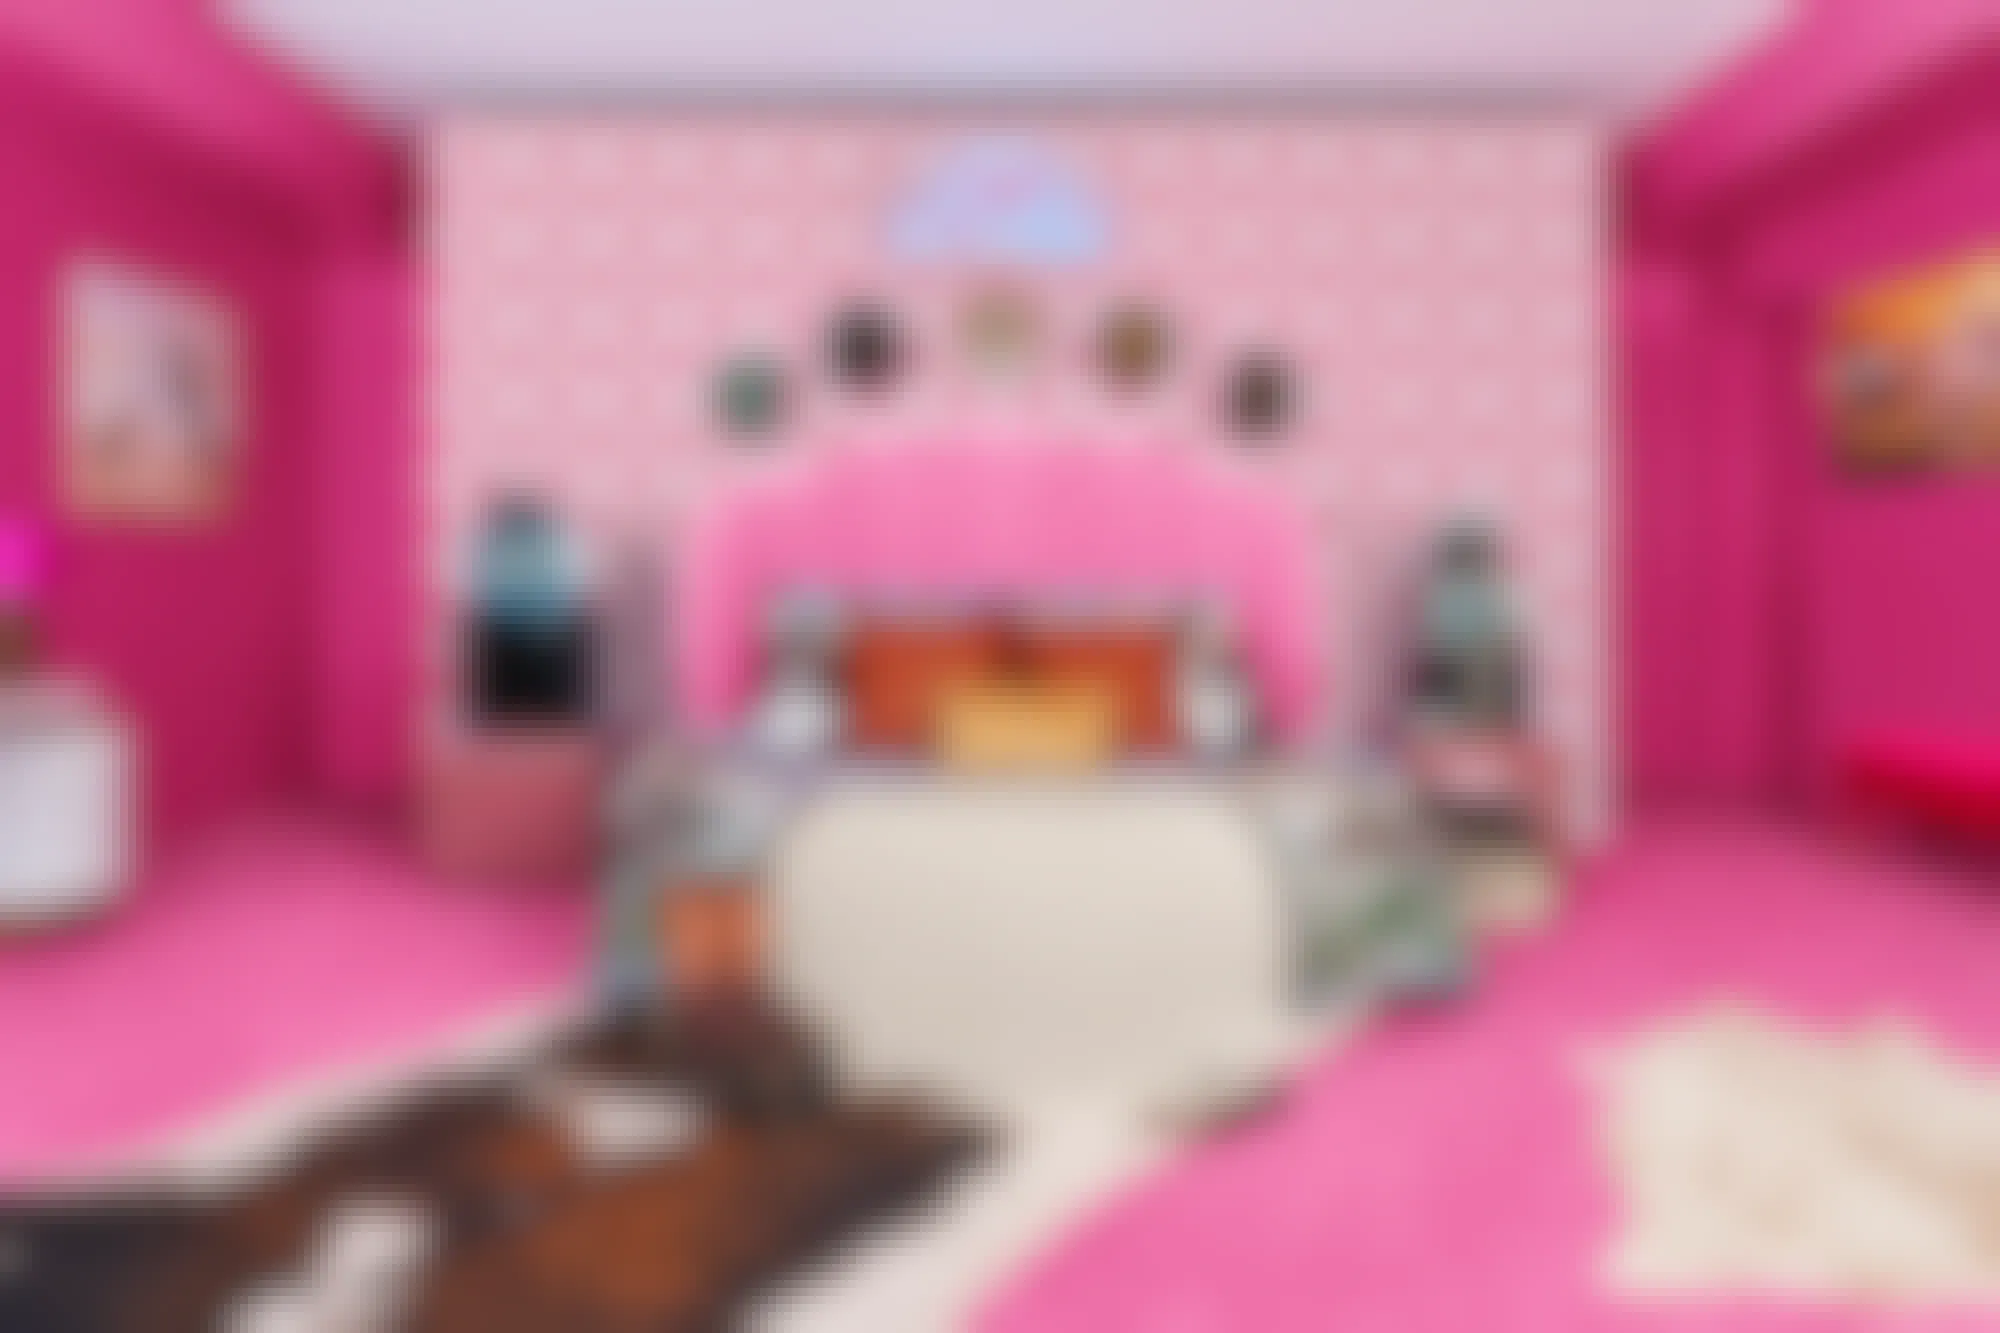 A bedroom in the Barbie's Malibu Dreamhouse Airbnb listing